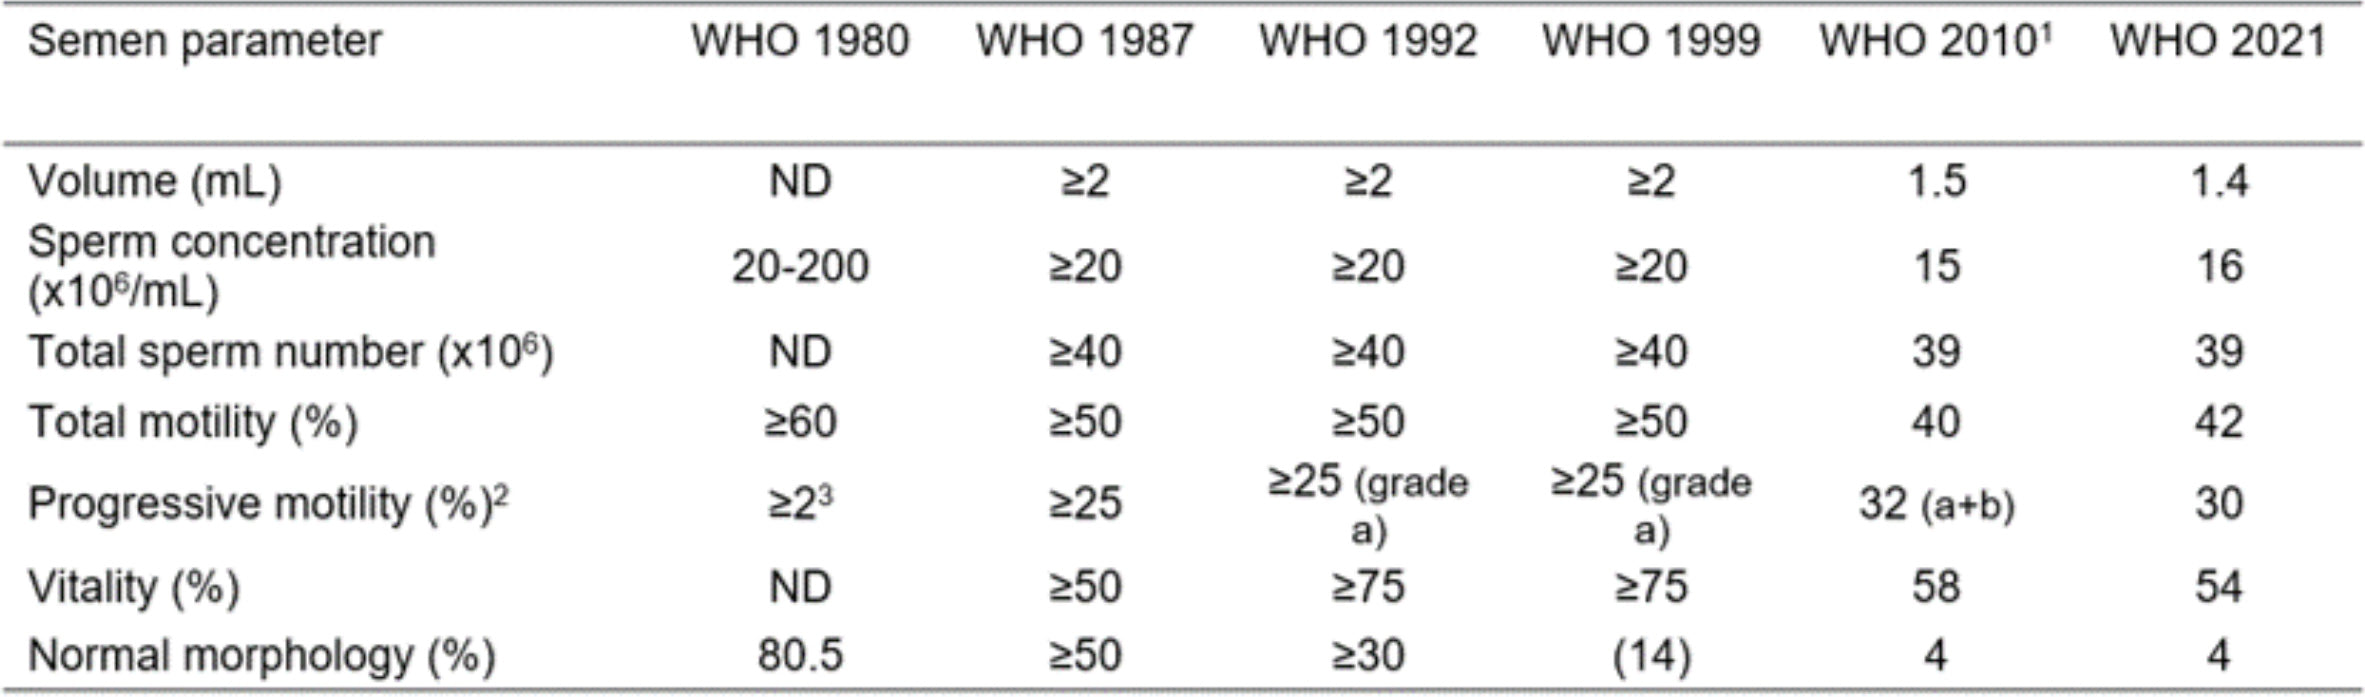 Reference values for semen characteristics as published in consecutive WHO manuals.